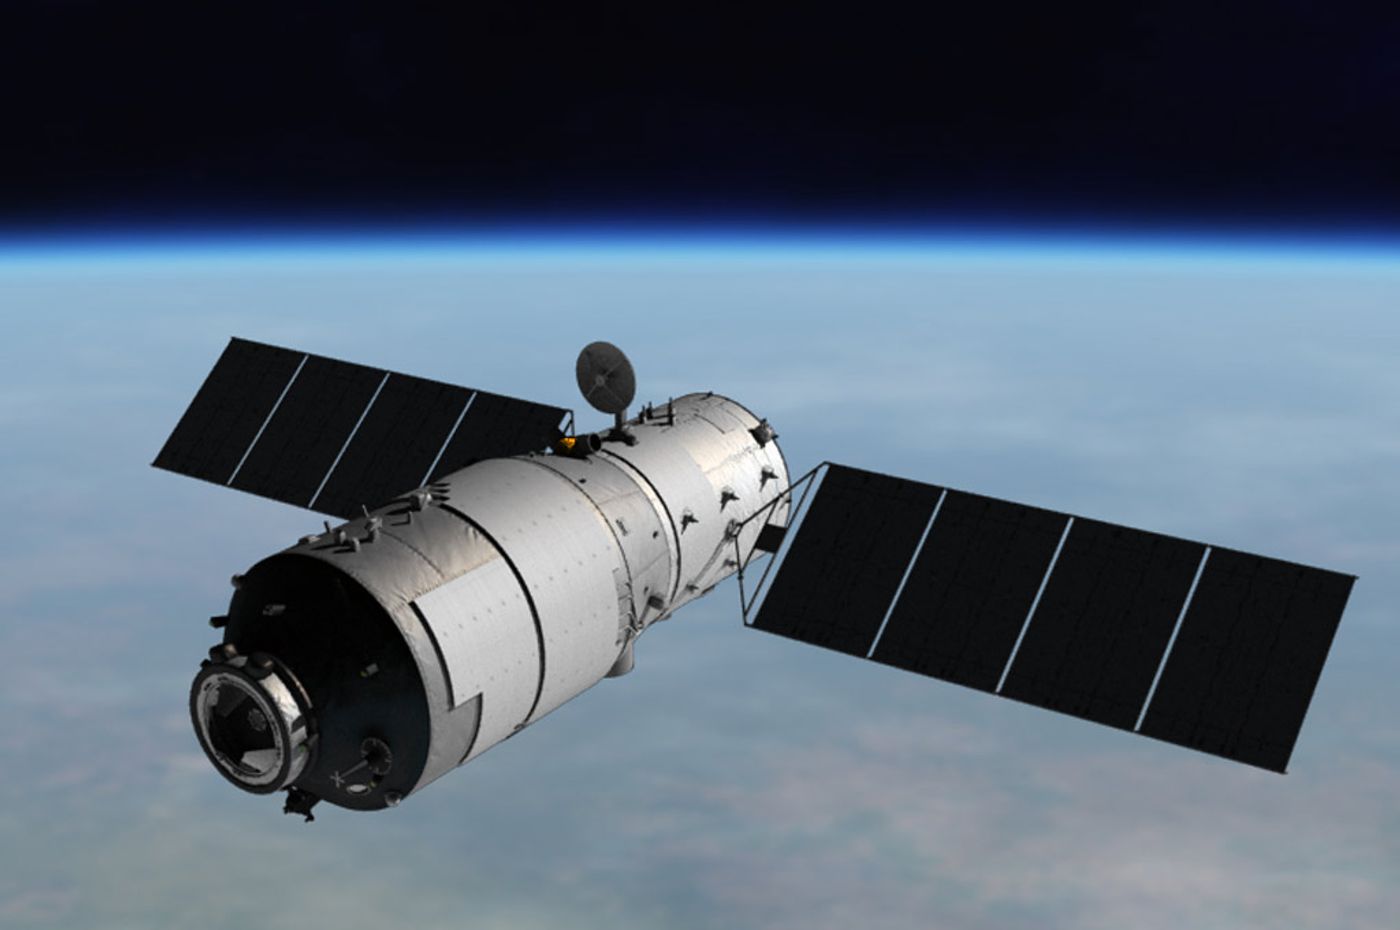 China's Tiangong-1 space lab is now headed on a crash course back to Earth, and we aren't sure exactly when or where this will occur.